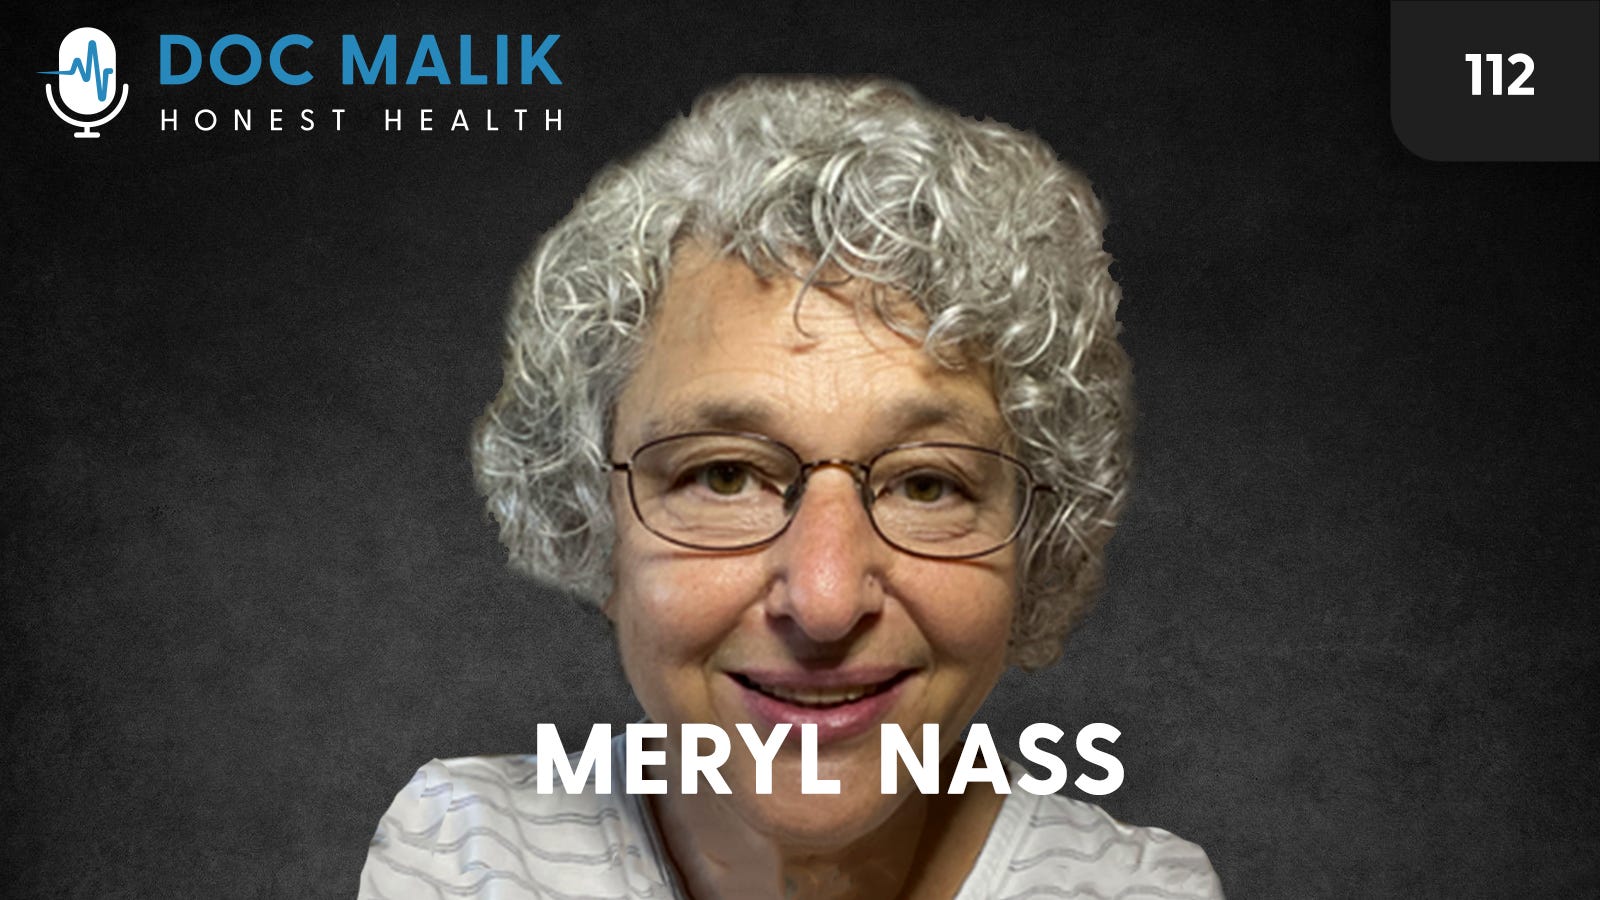 #112 - Dr Meryl Nass MD Talks To Me About The WHO And The Globalist Agenda